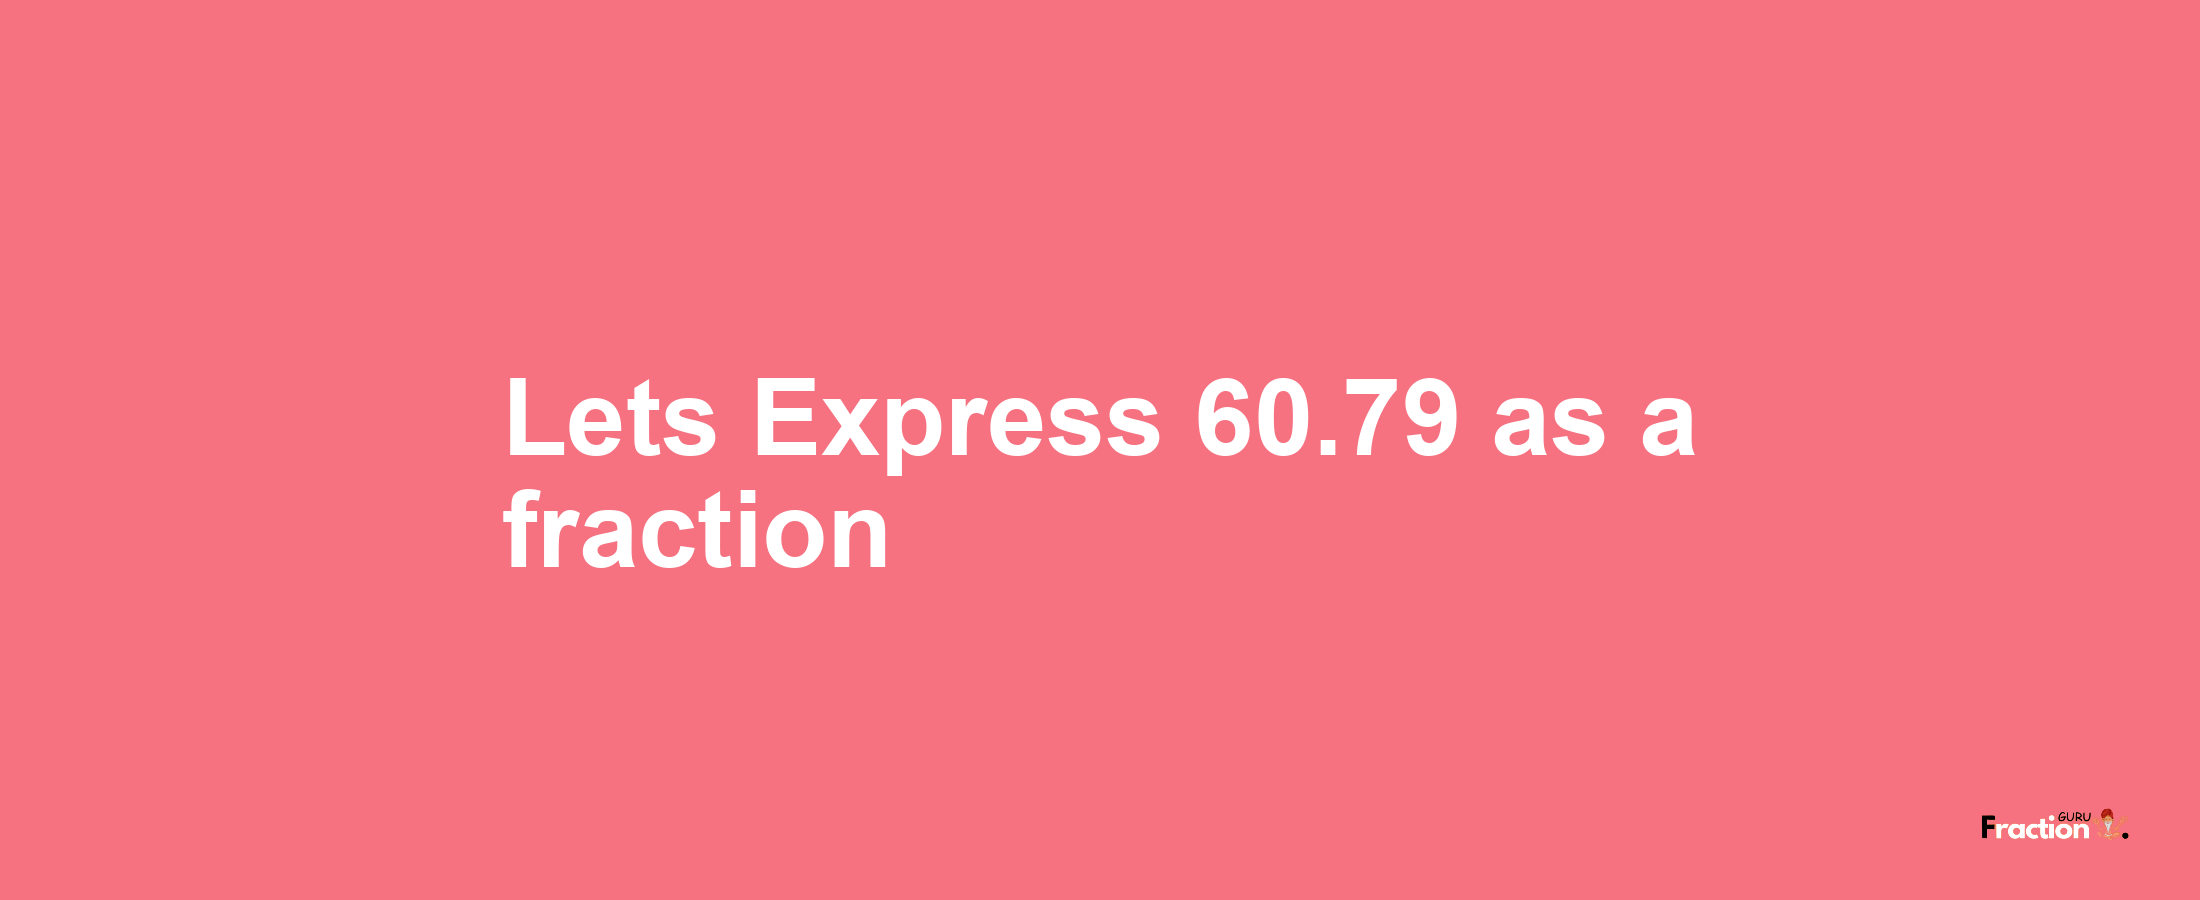 Lets Express 60.79 as afraction